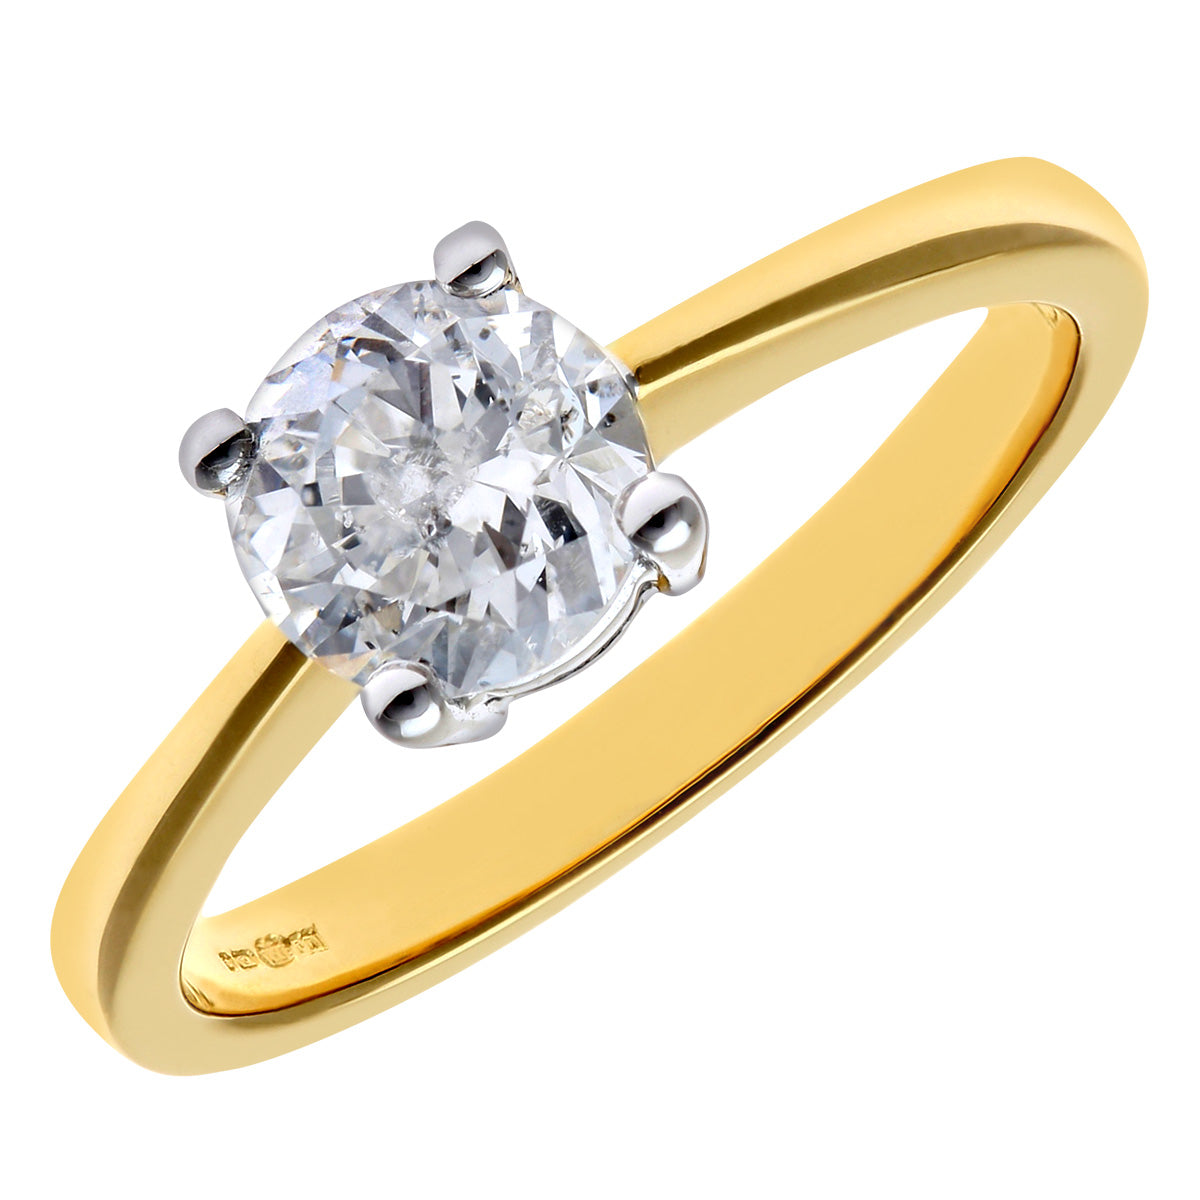 18ct Gold  Round 1ct Diamond 4 Claw Solitaire Engagement Ring - PR0AXL4690Y18HSI